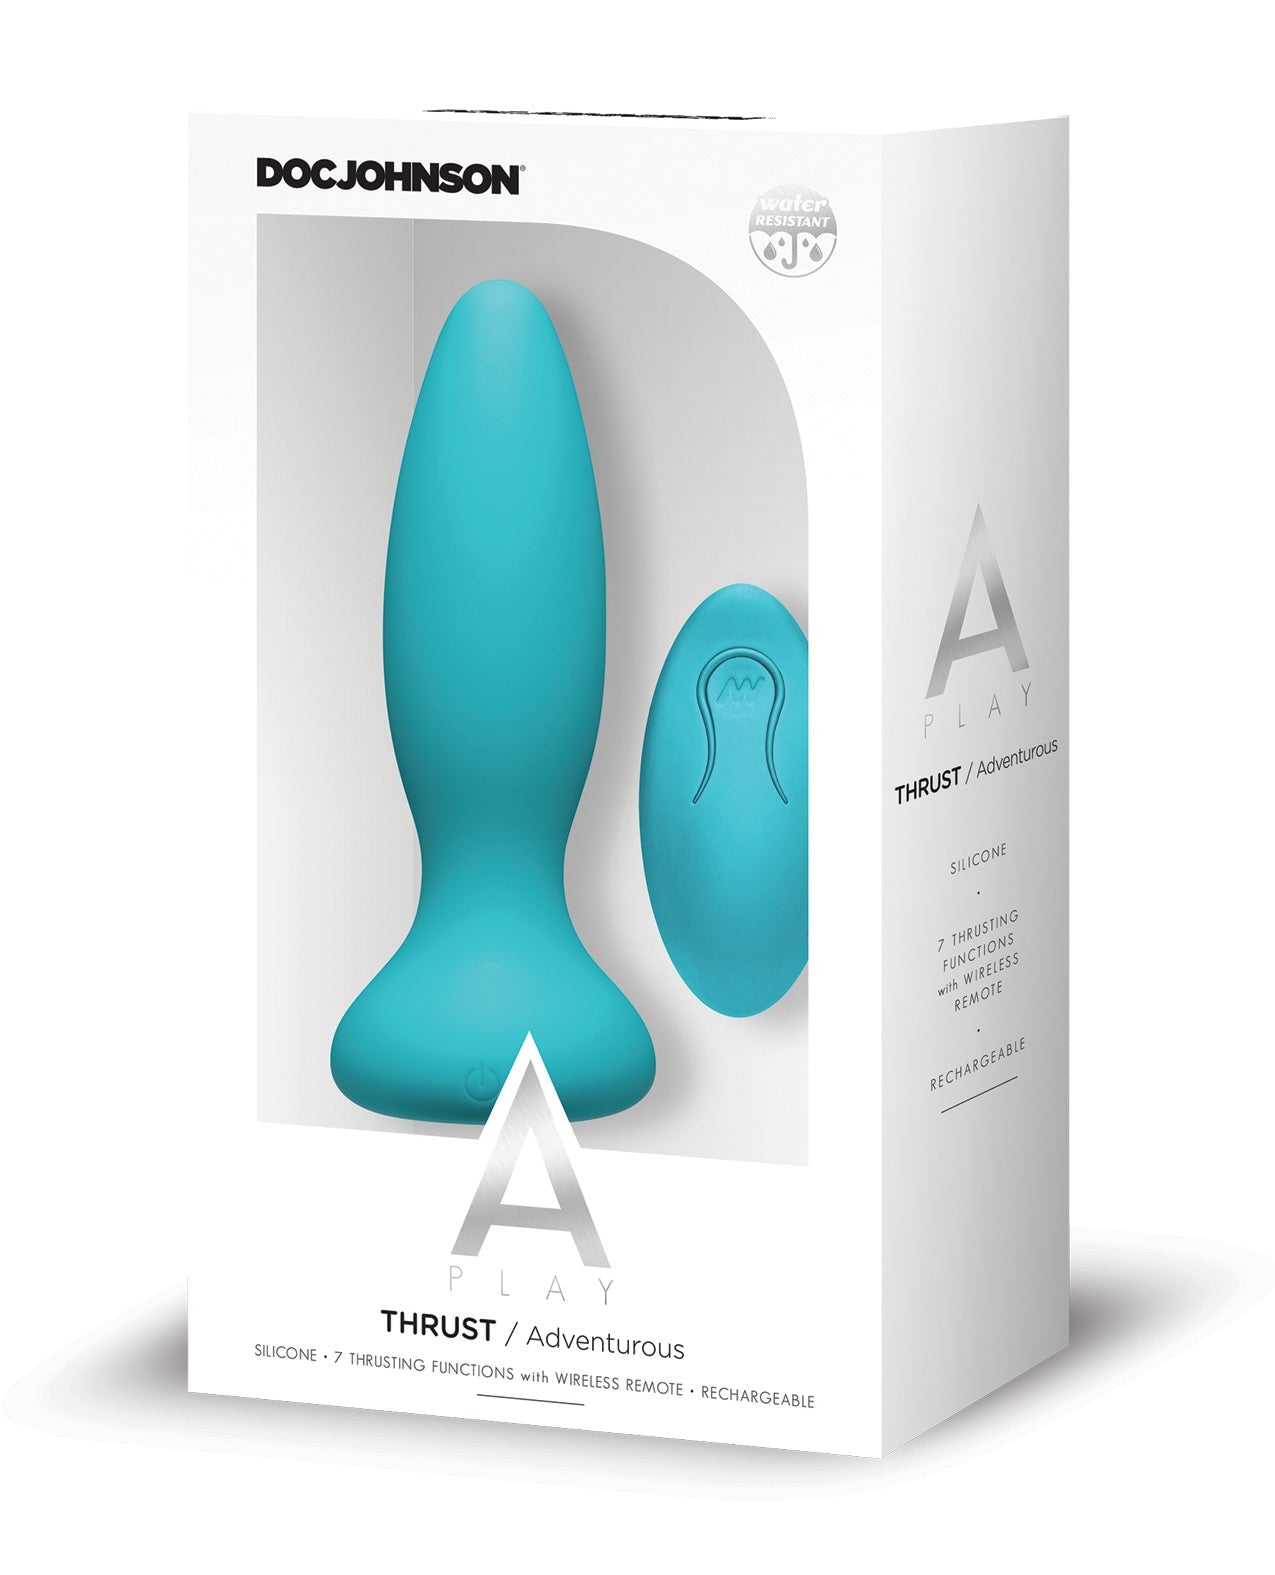 Get A Play Thrust Adventurous Rechargeable Anal Plug w/Remotes - Teal